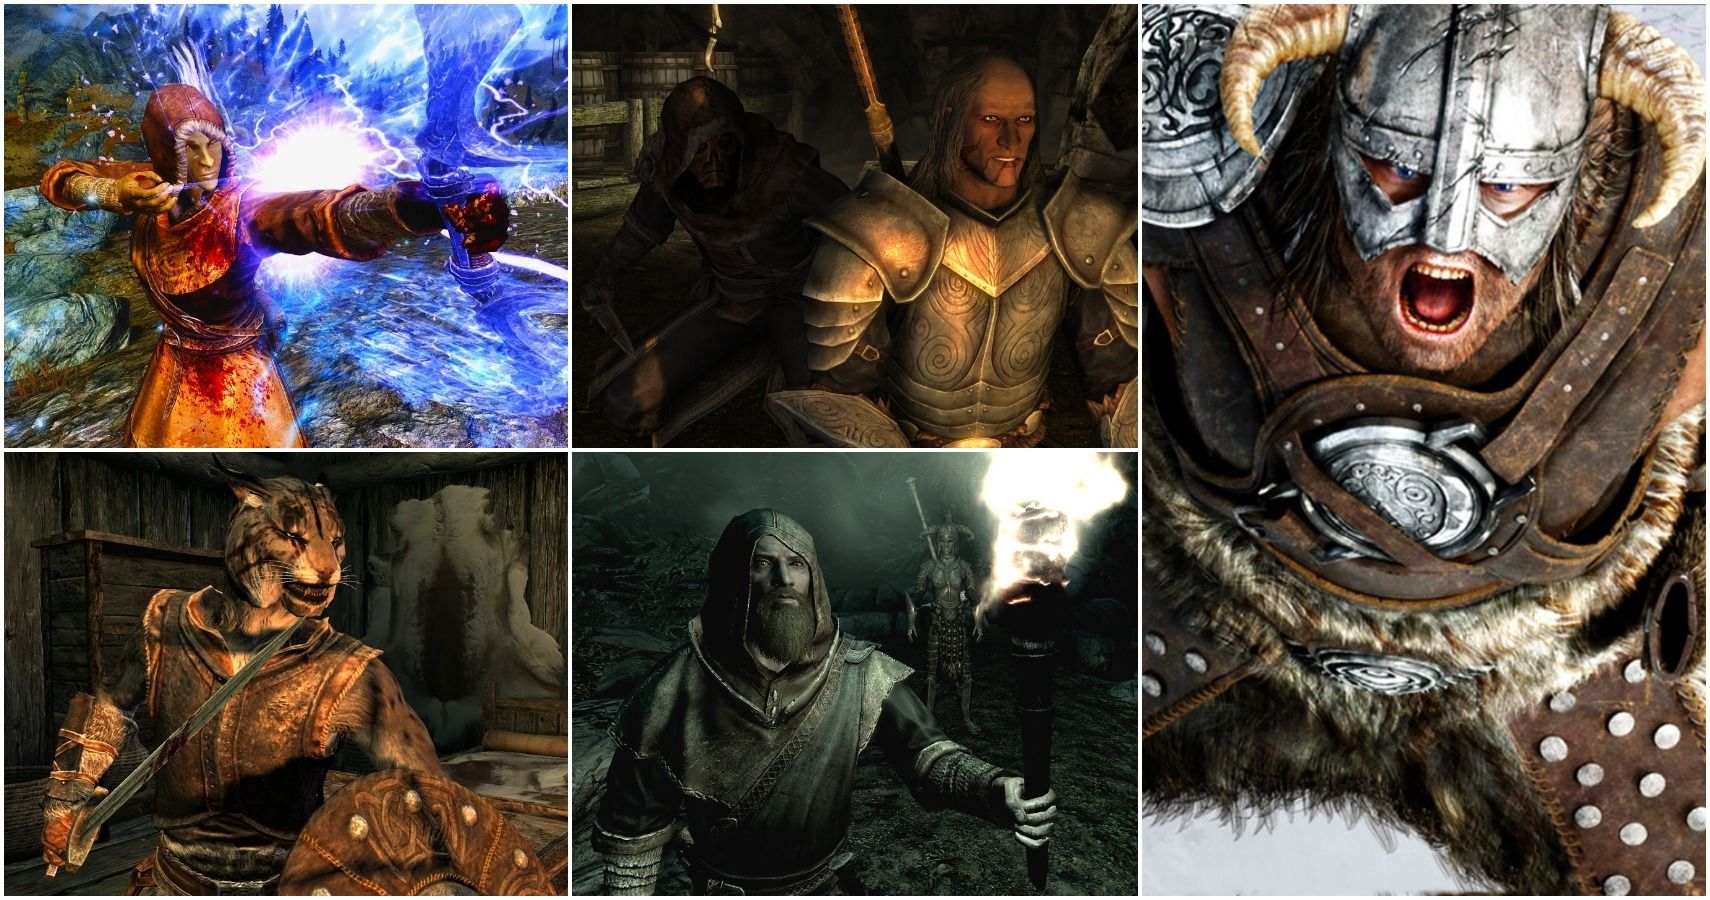 Skyrim: The 10 Most Worthless Perks (Ranked From Bad To Worst)